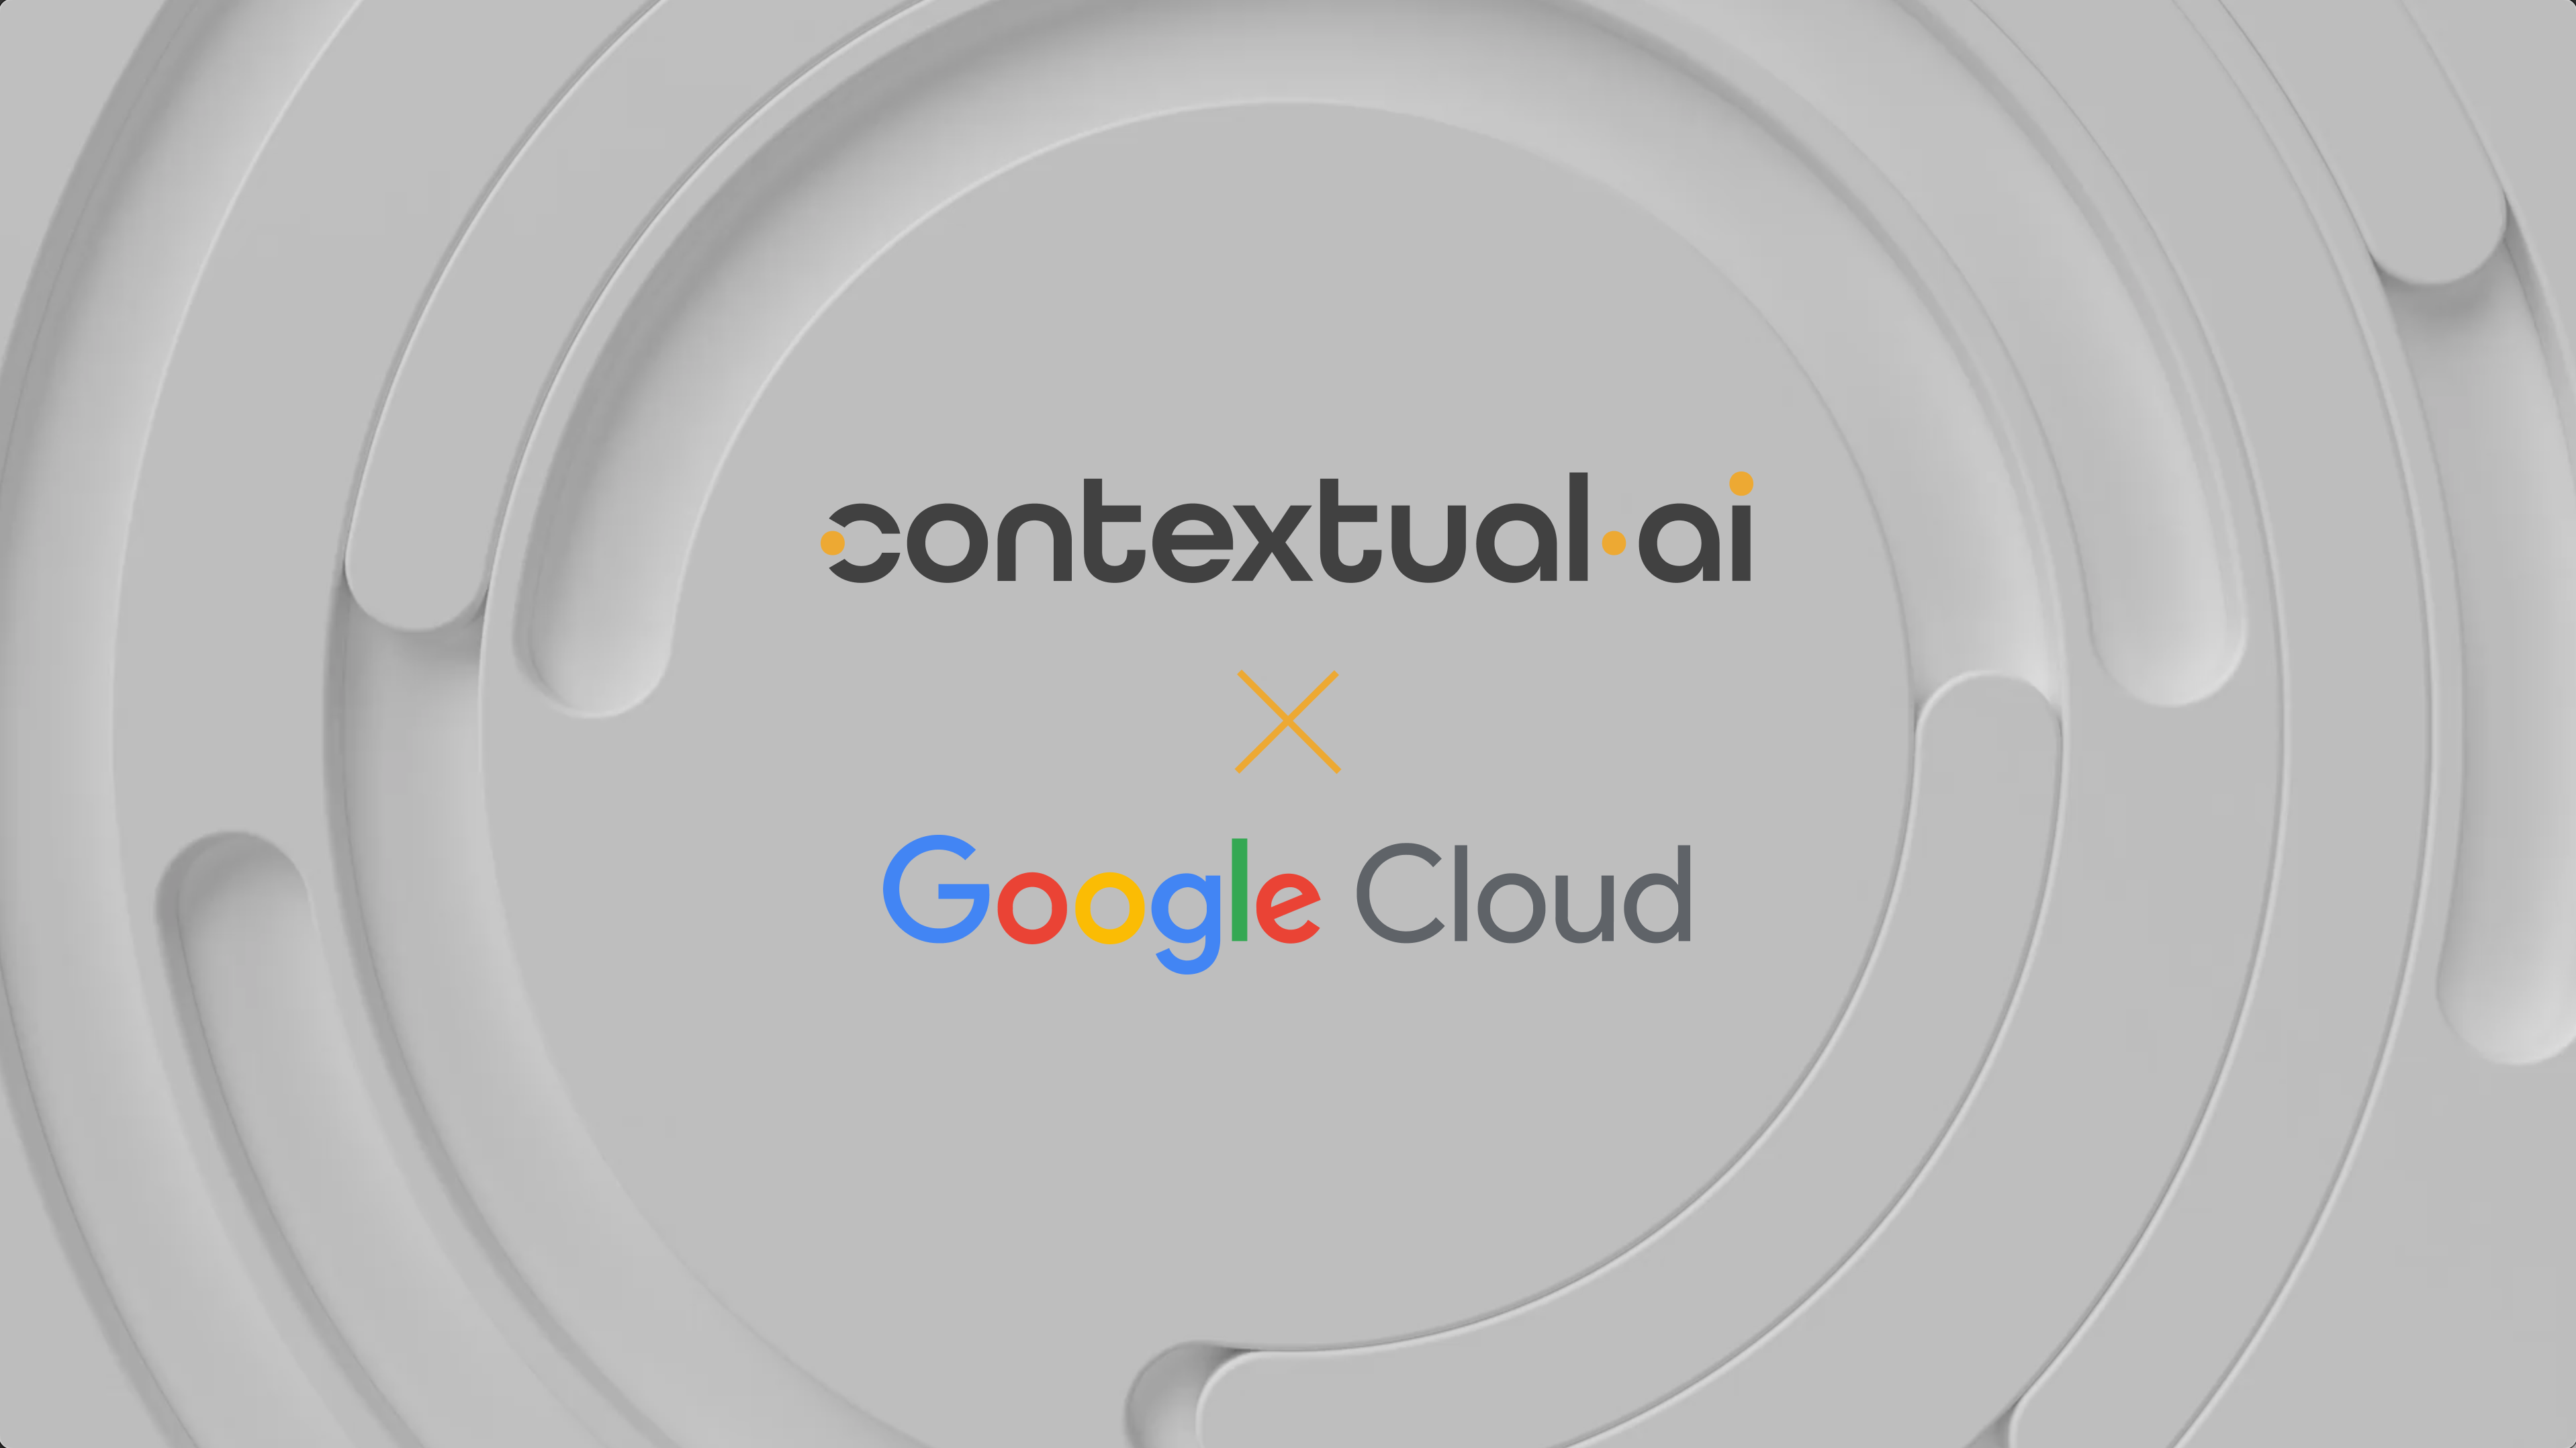 Contextual AI partners with Google Cloud to bring generative AI to the enterprise